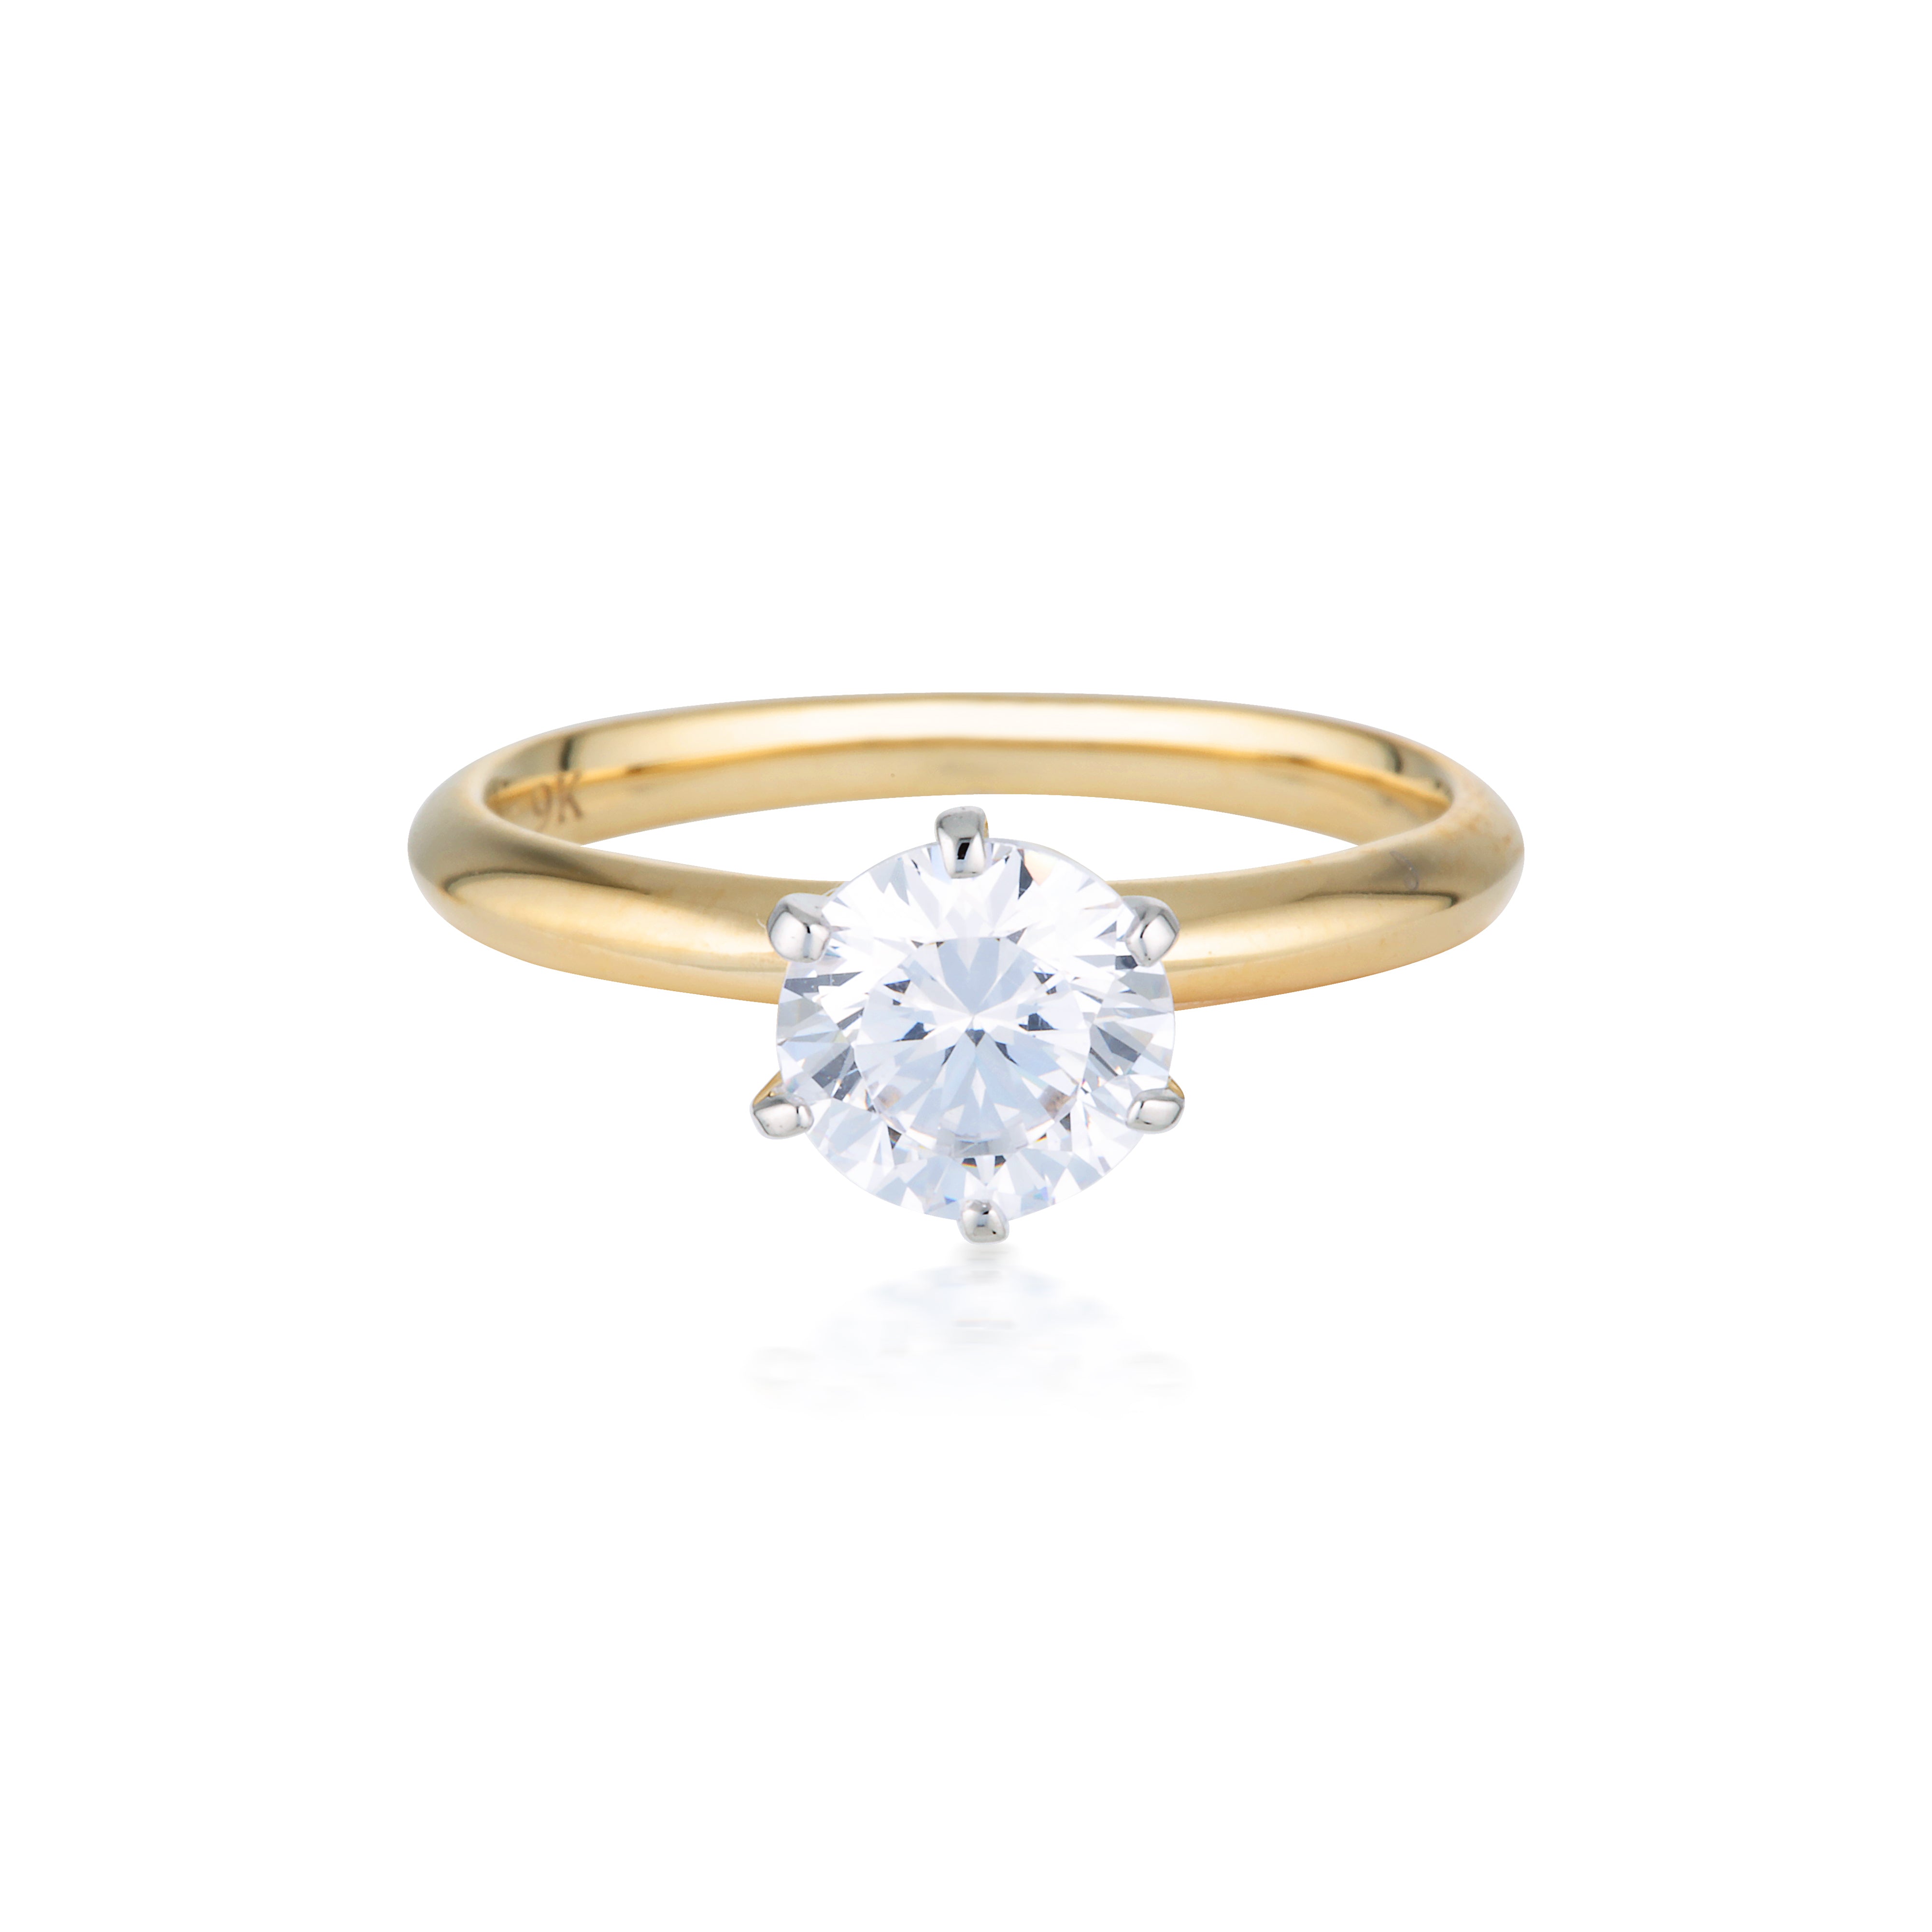 ROUND BRILLIANT CUT 1.25CTW MOISSANITE SOLITAIRE WITH KNIFE EDGE BAND IN YELLOW GOLD